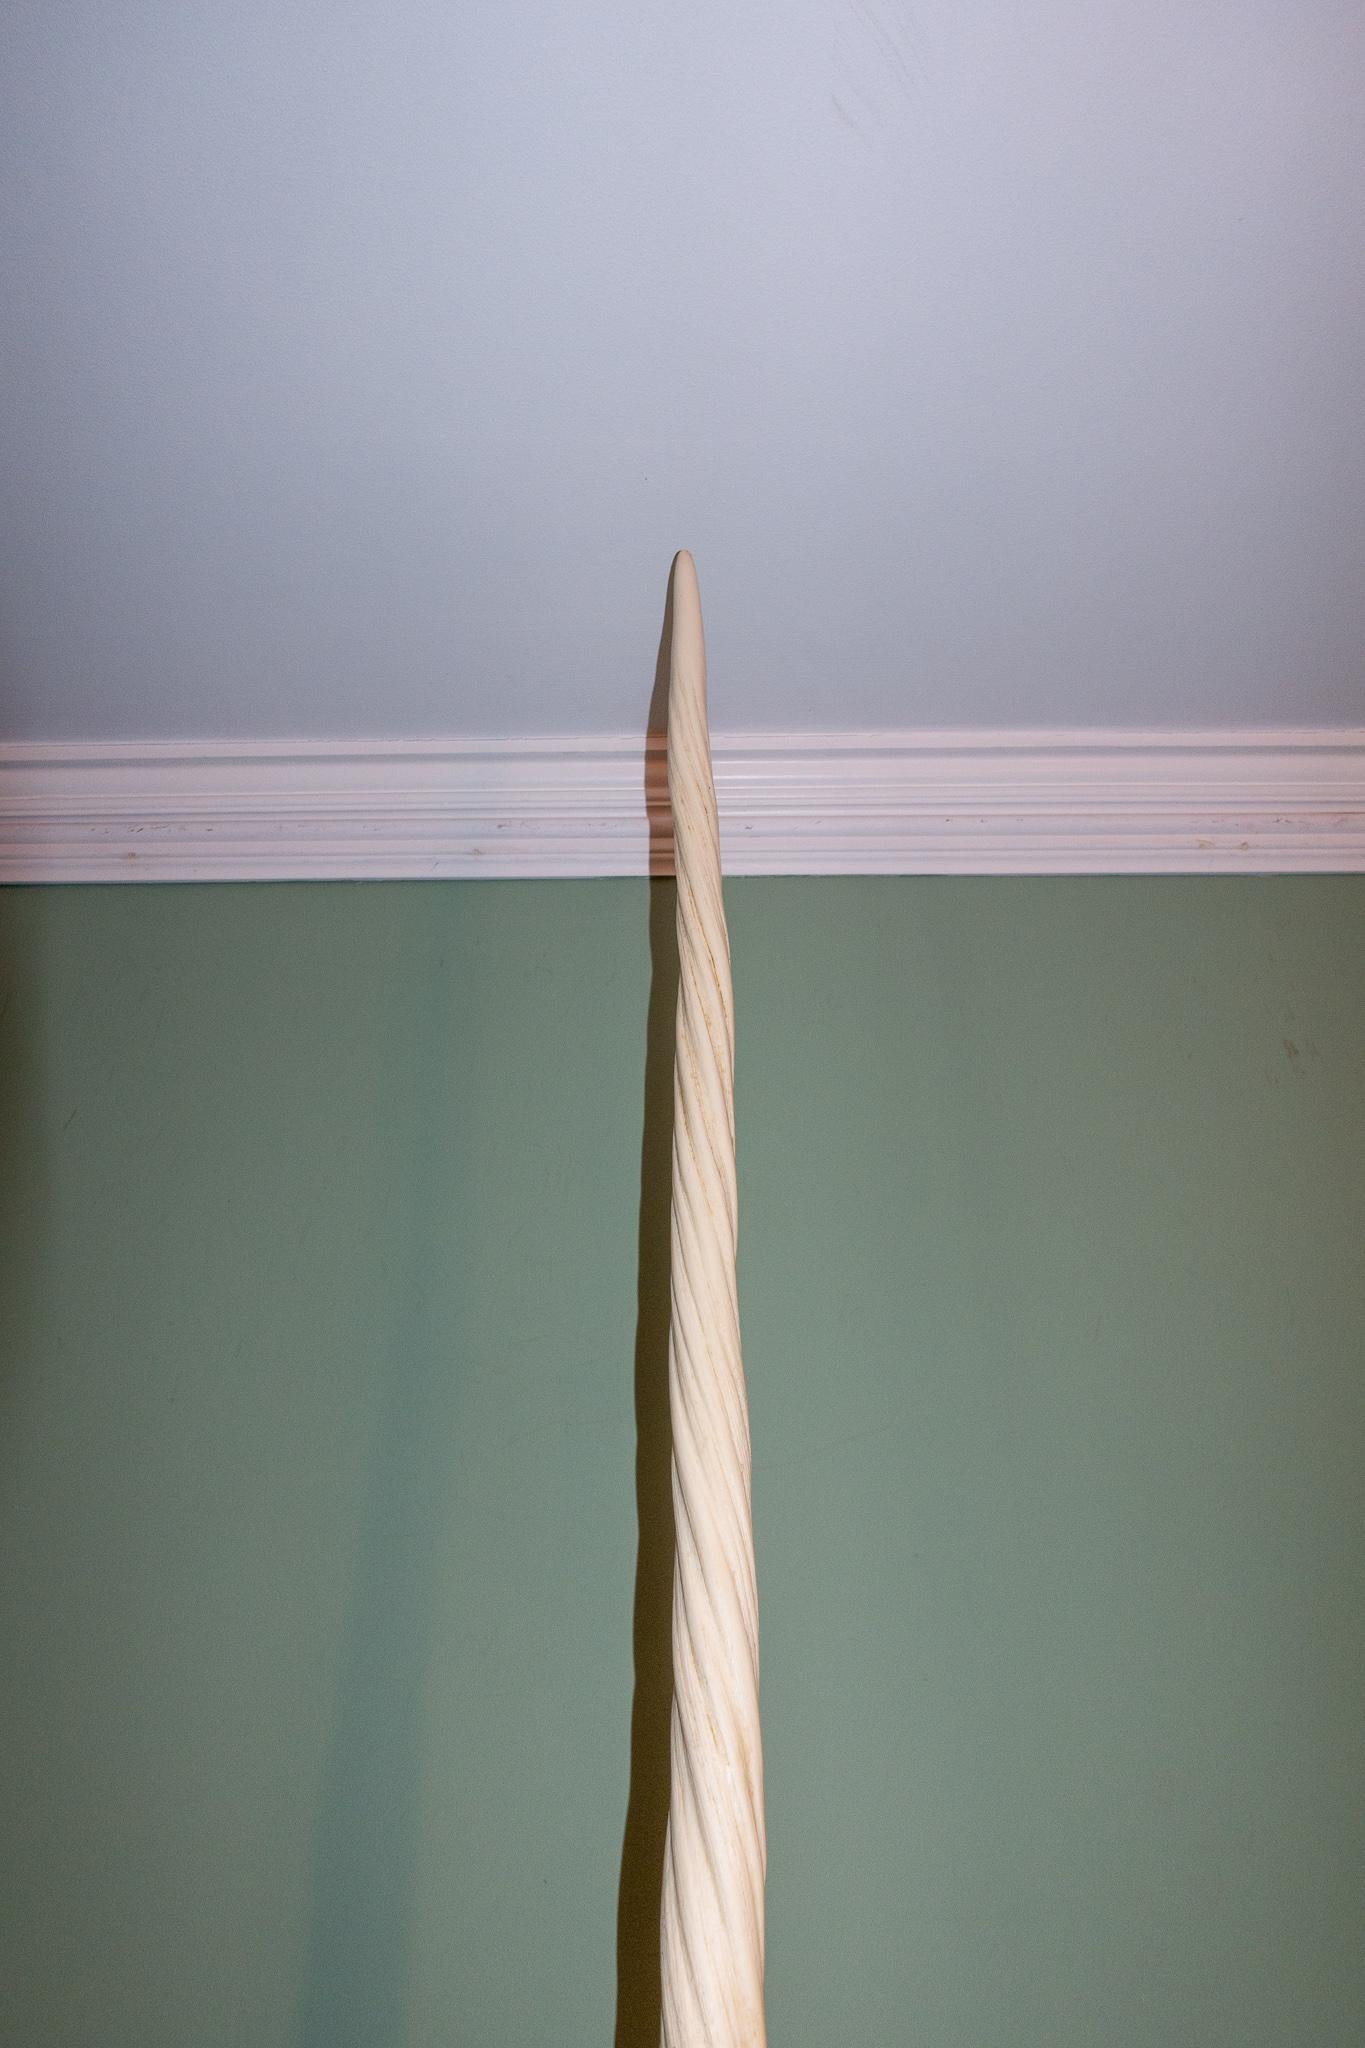 narwhal tusk for sale uk